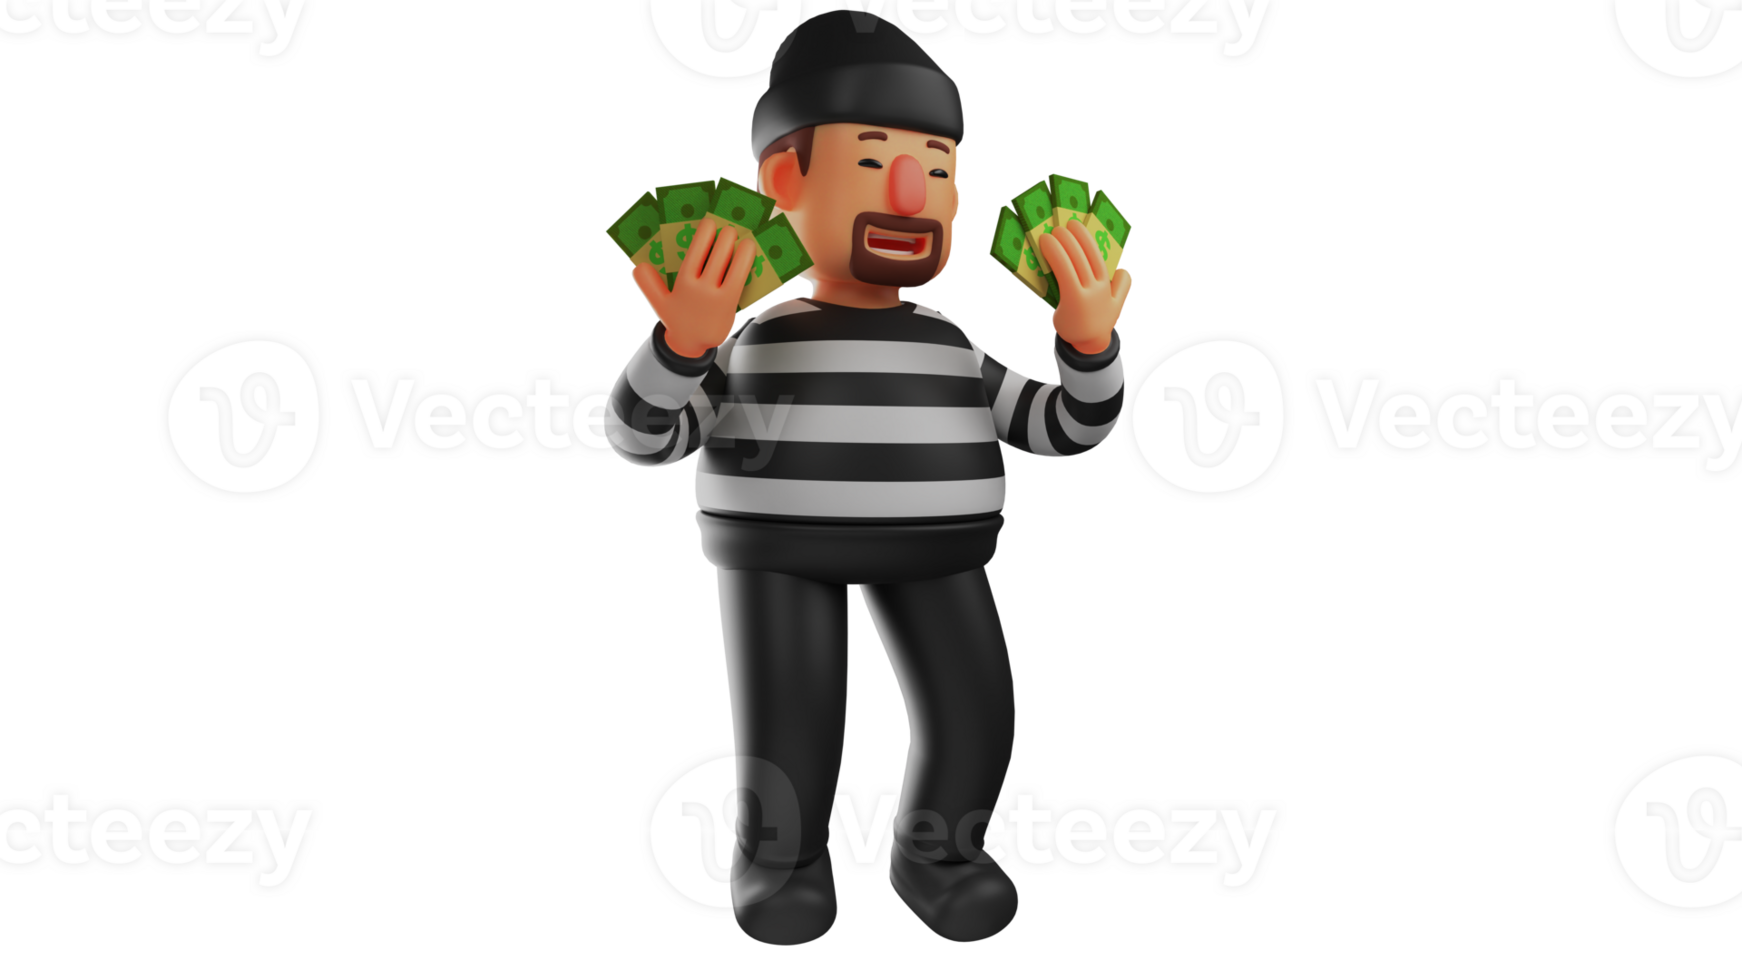 3D illustration. Villain 3D Cartoon Character. Criminals who commit theft somewhere. The thief holds a collection of money in both hands. The thief smiled sweetly. 3D cartoon character png